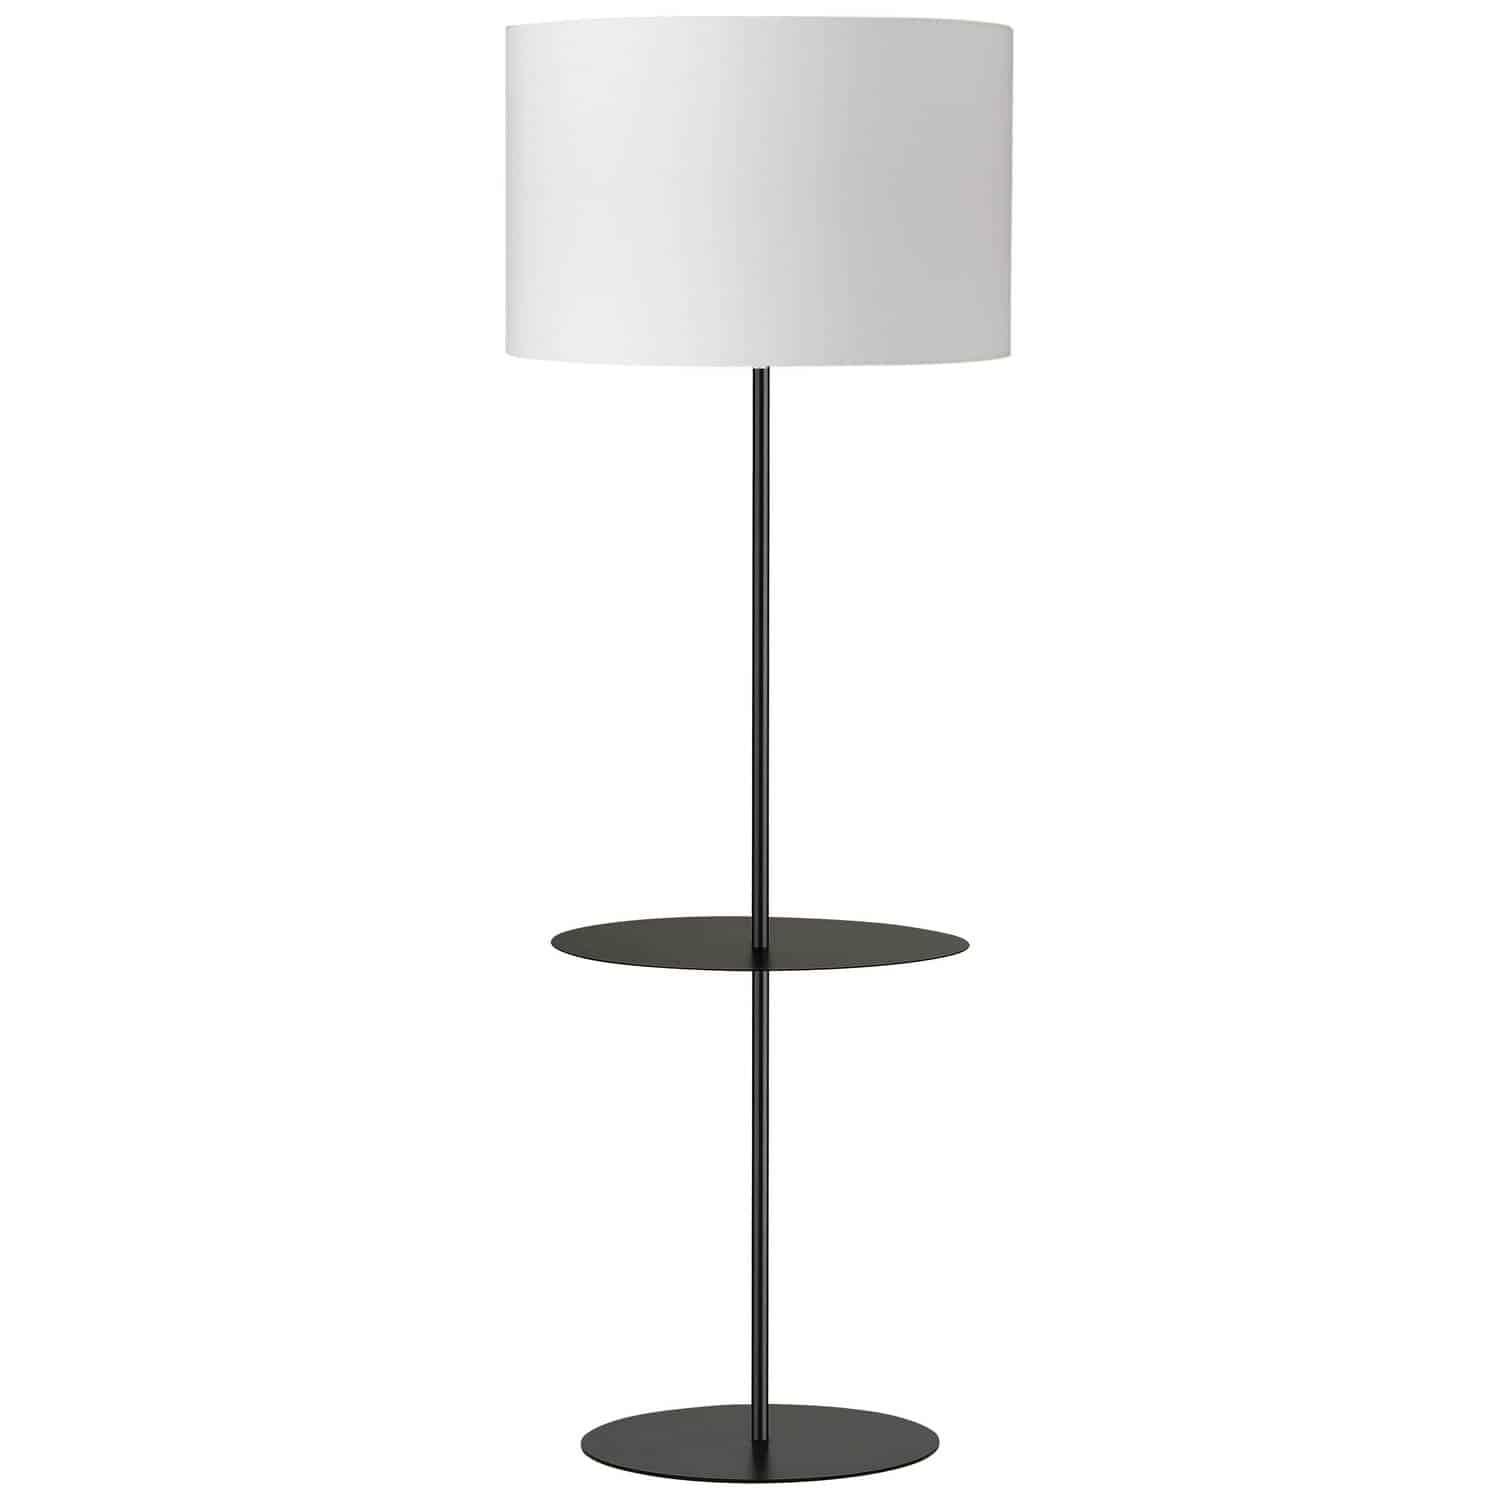 Incorporating a small table within its chic design, the Tablero family of lighting is ideal for spaces where you entertain. It's a functional construction delivered with artistic panache. The metal base holds an elegantly thin rod and a classic fabric shade. The hardback shade is available in either a round or square drum shape which will echo the base of the lamp. With its combination of traditional and modern forms, Tablero lighting will add a note of luxurious transitional style to a bedroom, living room or foyer.